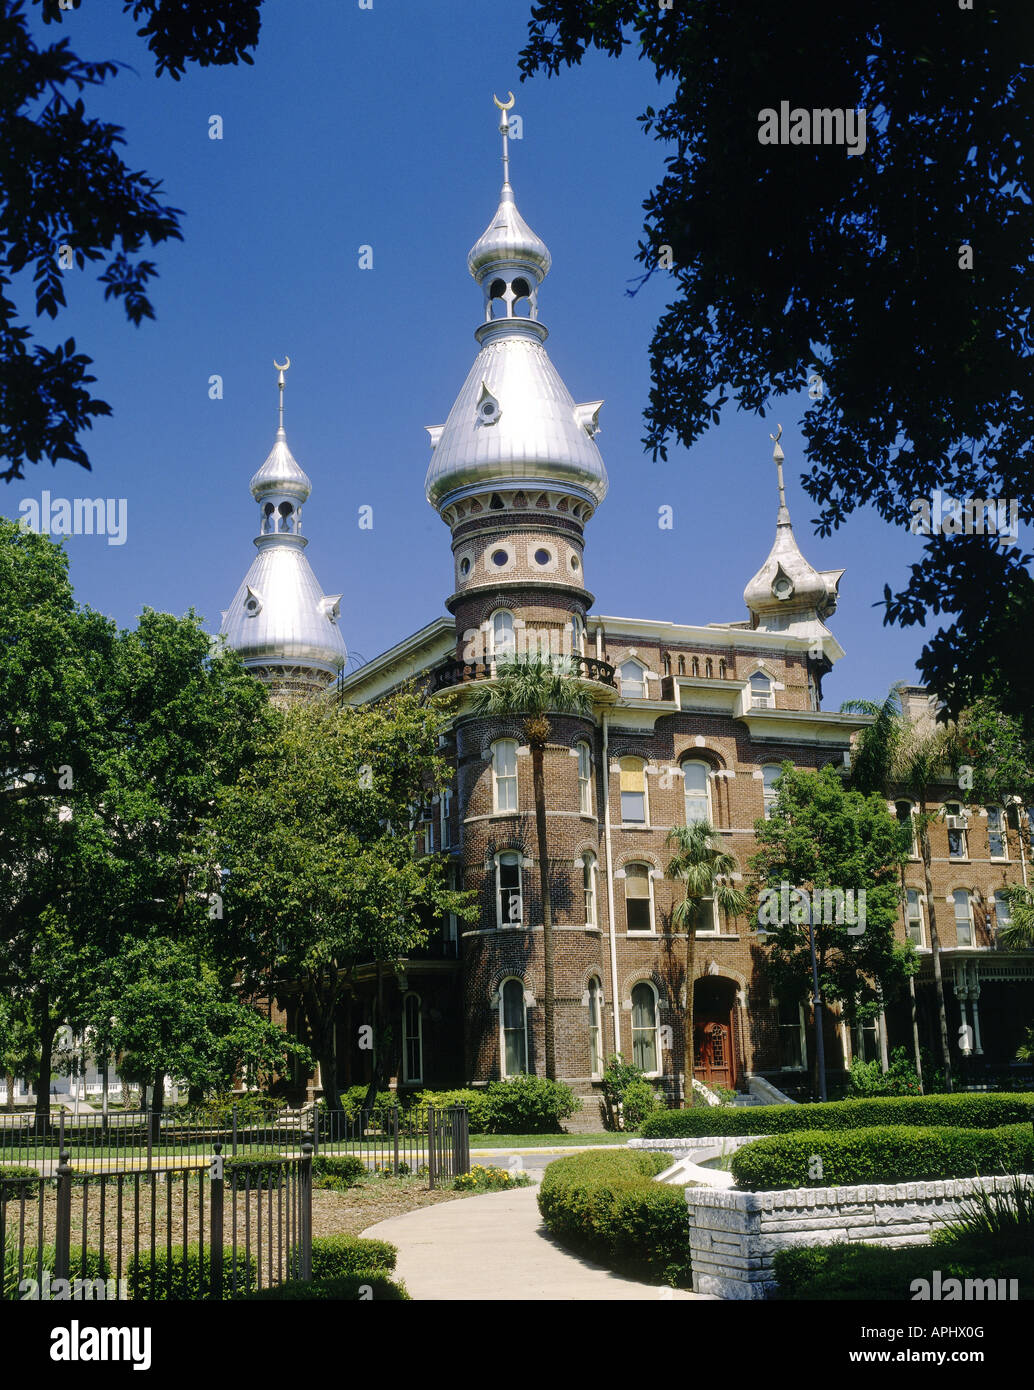 geography / travel, USA, Florida, Tampa, University, former Tampa Bay Hotel, exterior view, North America, architecture, Stock Photo